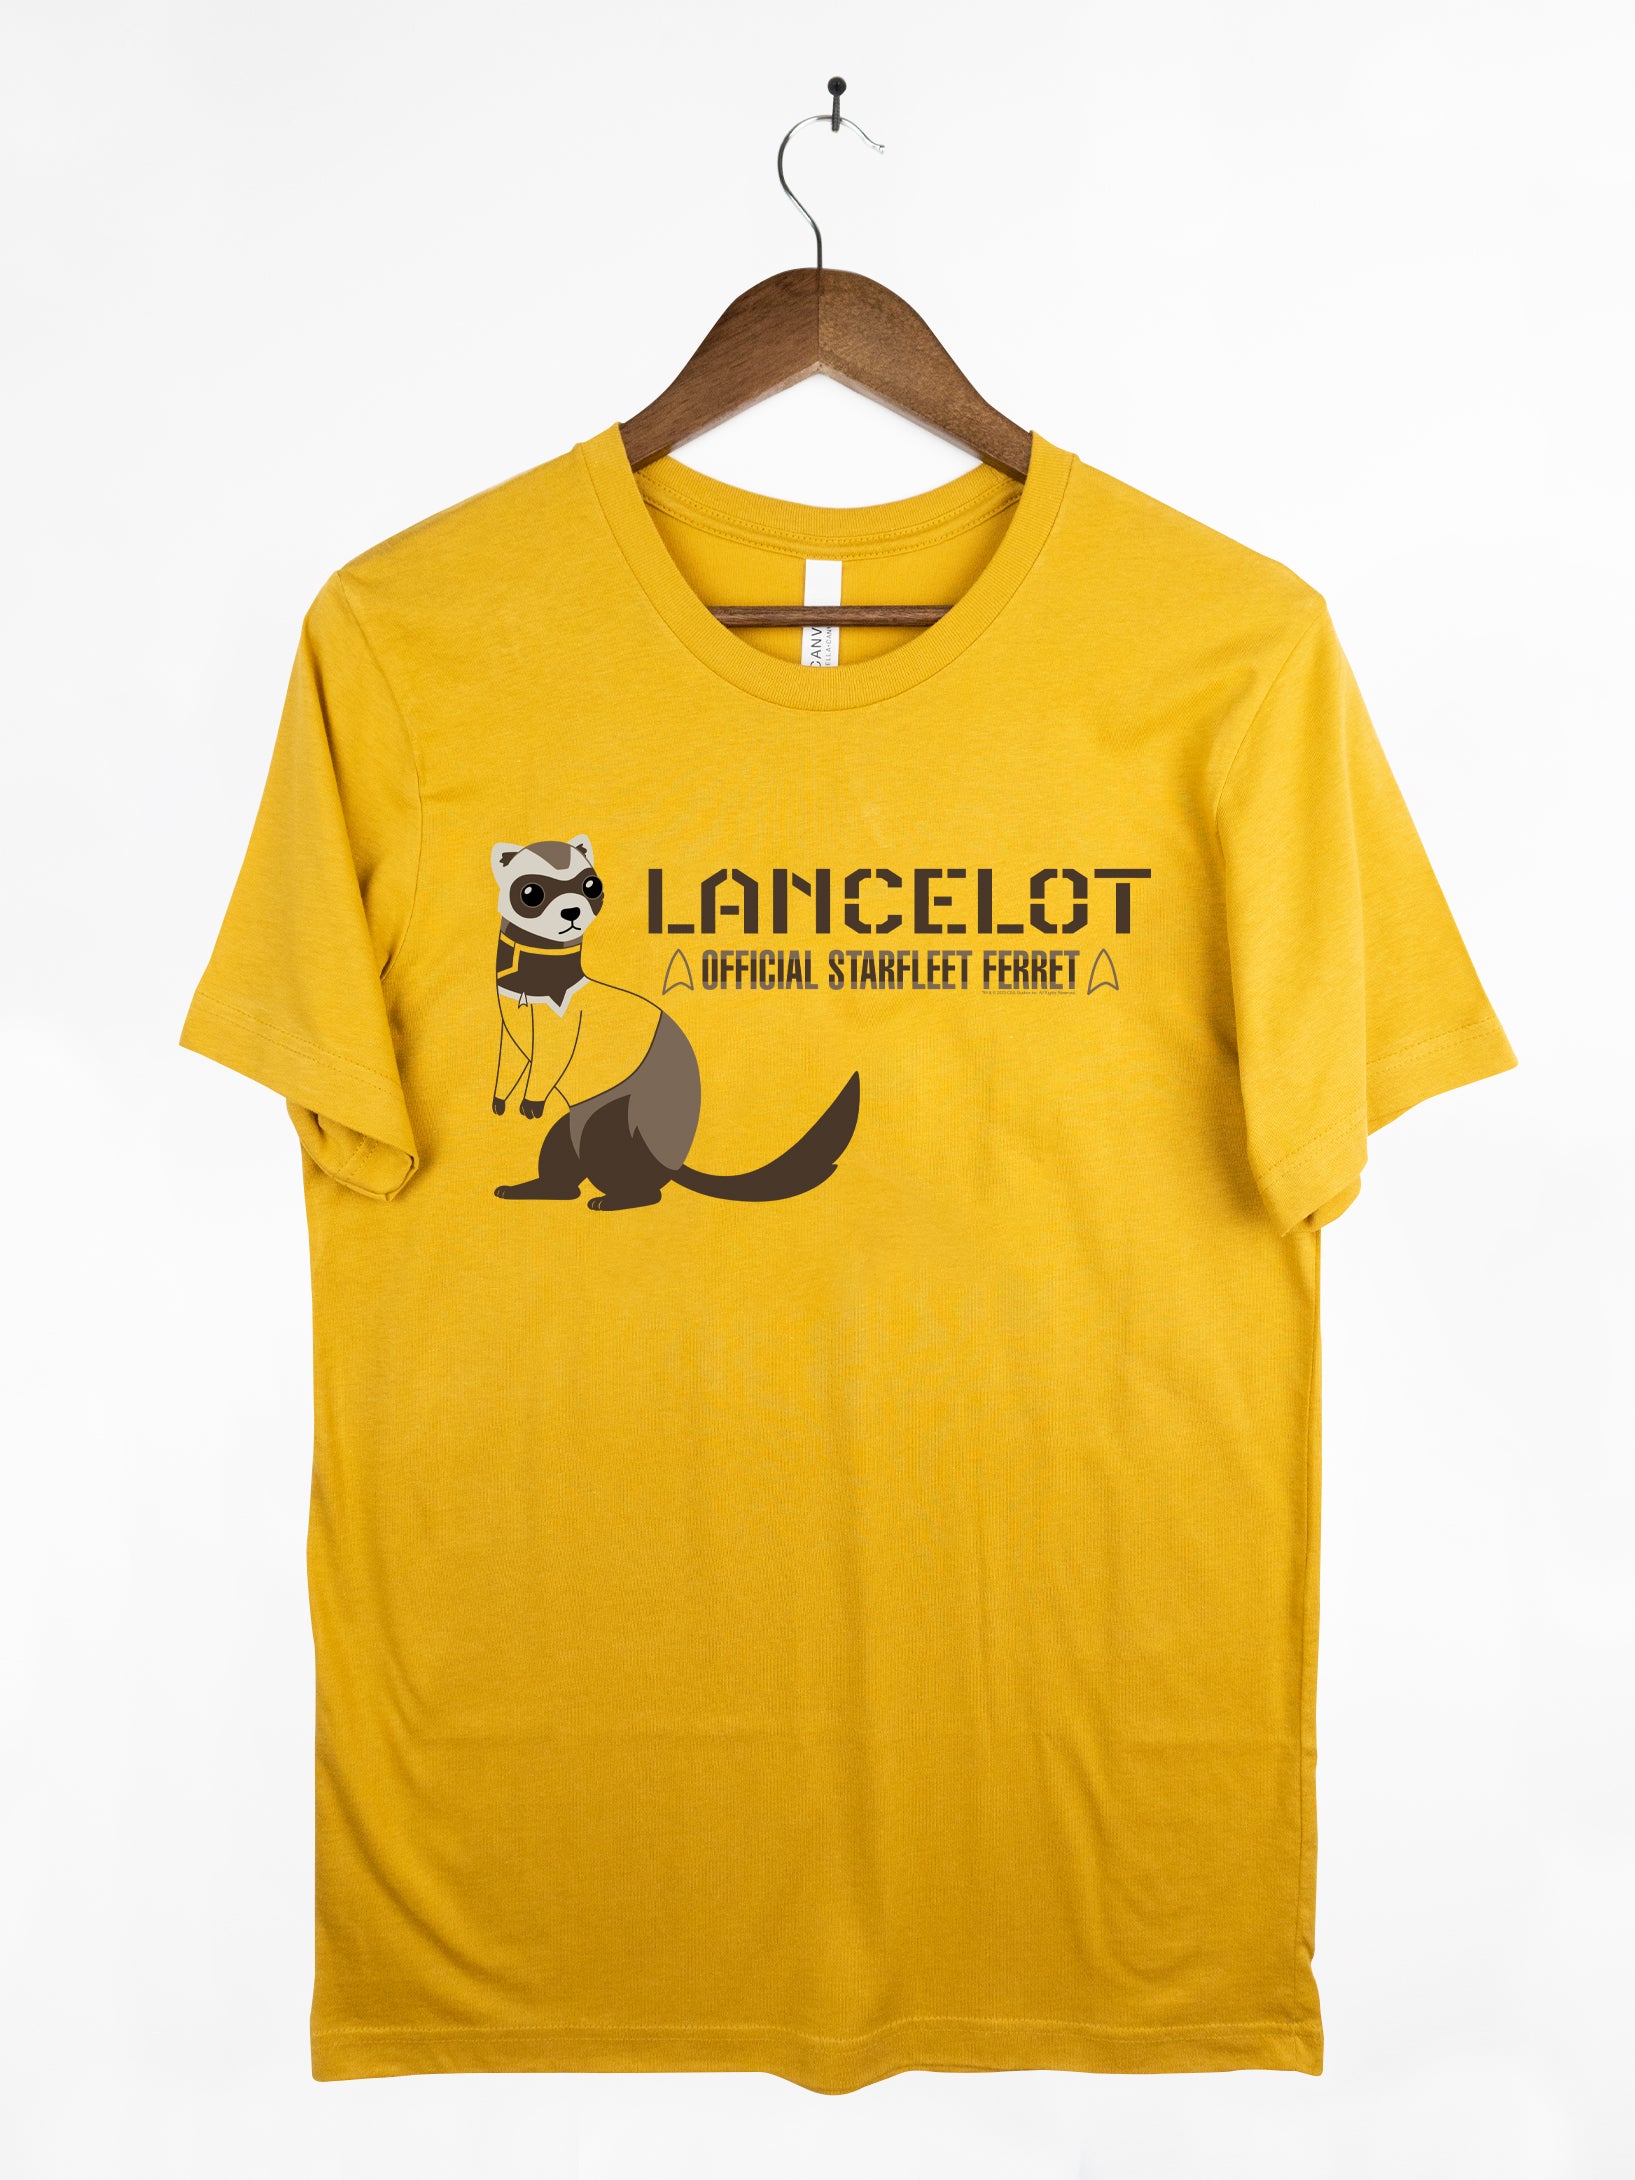 LD S4 Shirt Collective WEEK 3: In the Cradle of Vexilon – Titmouse Stuff